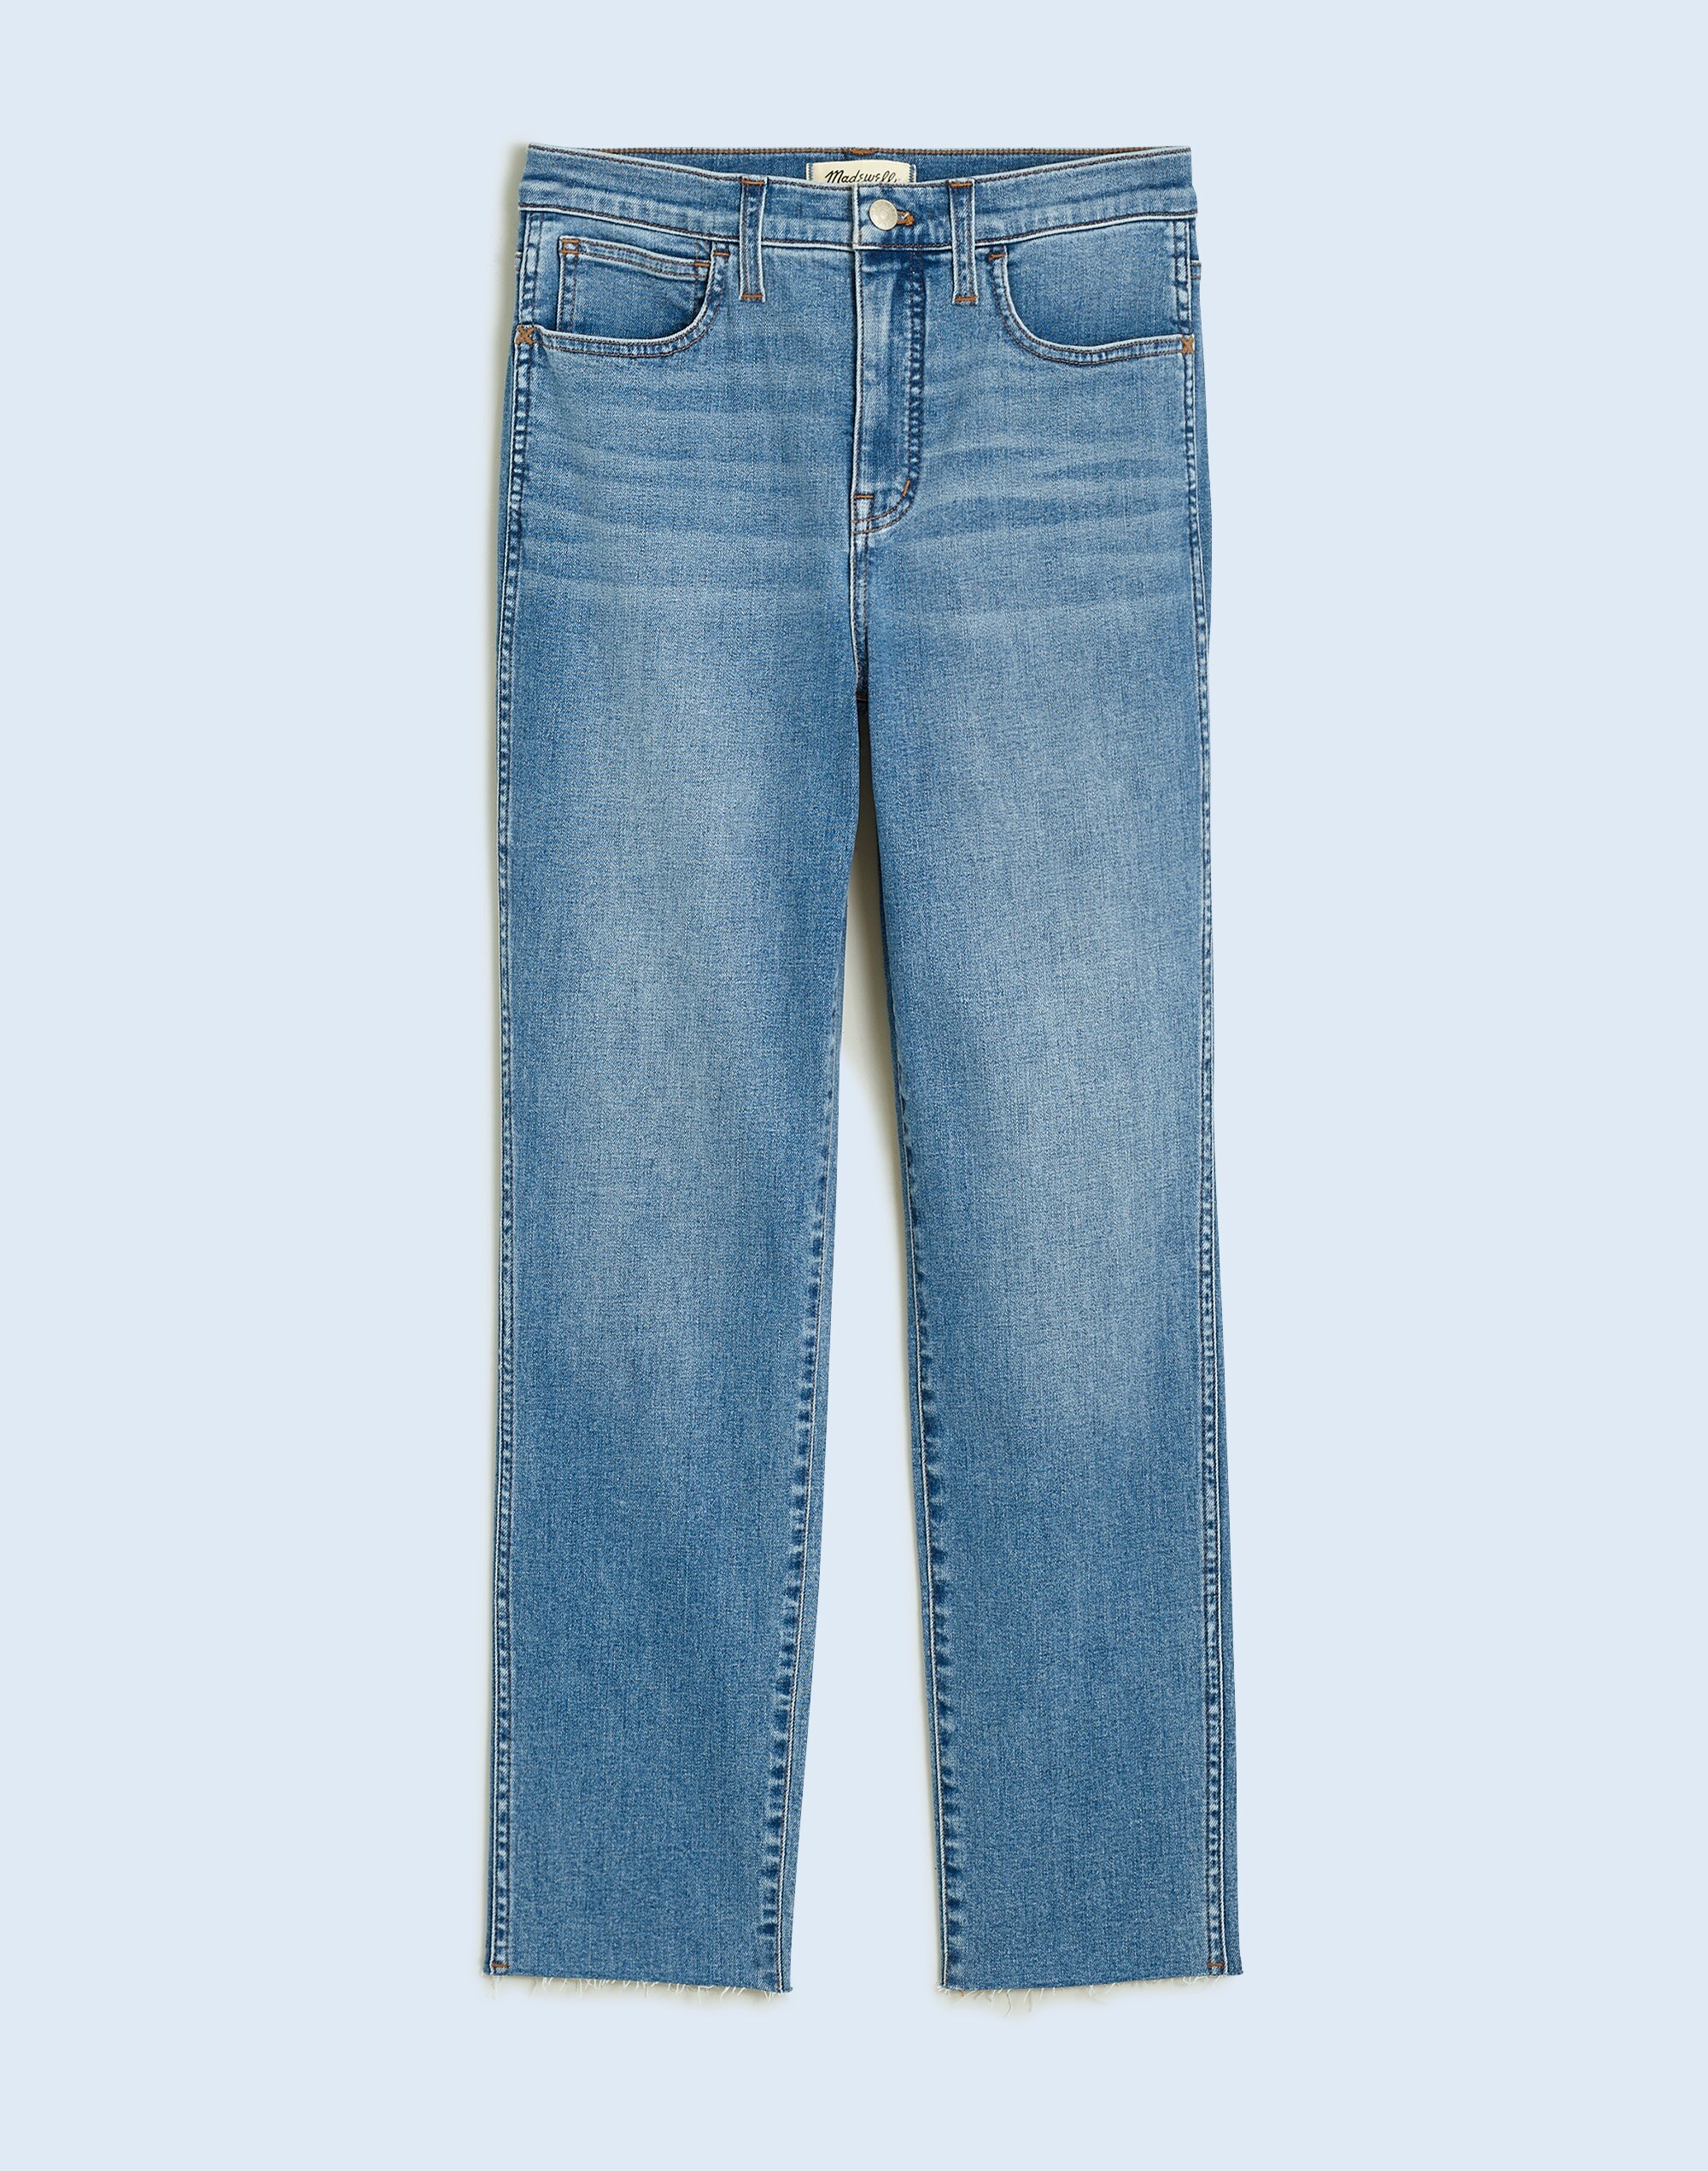 Plus Stovepipe Jeans Mather Wash